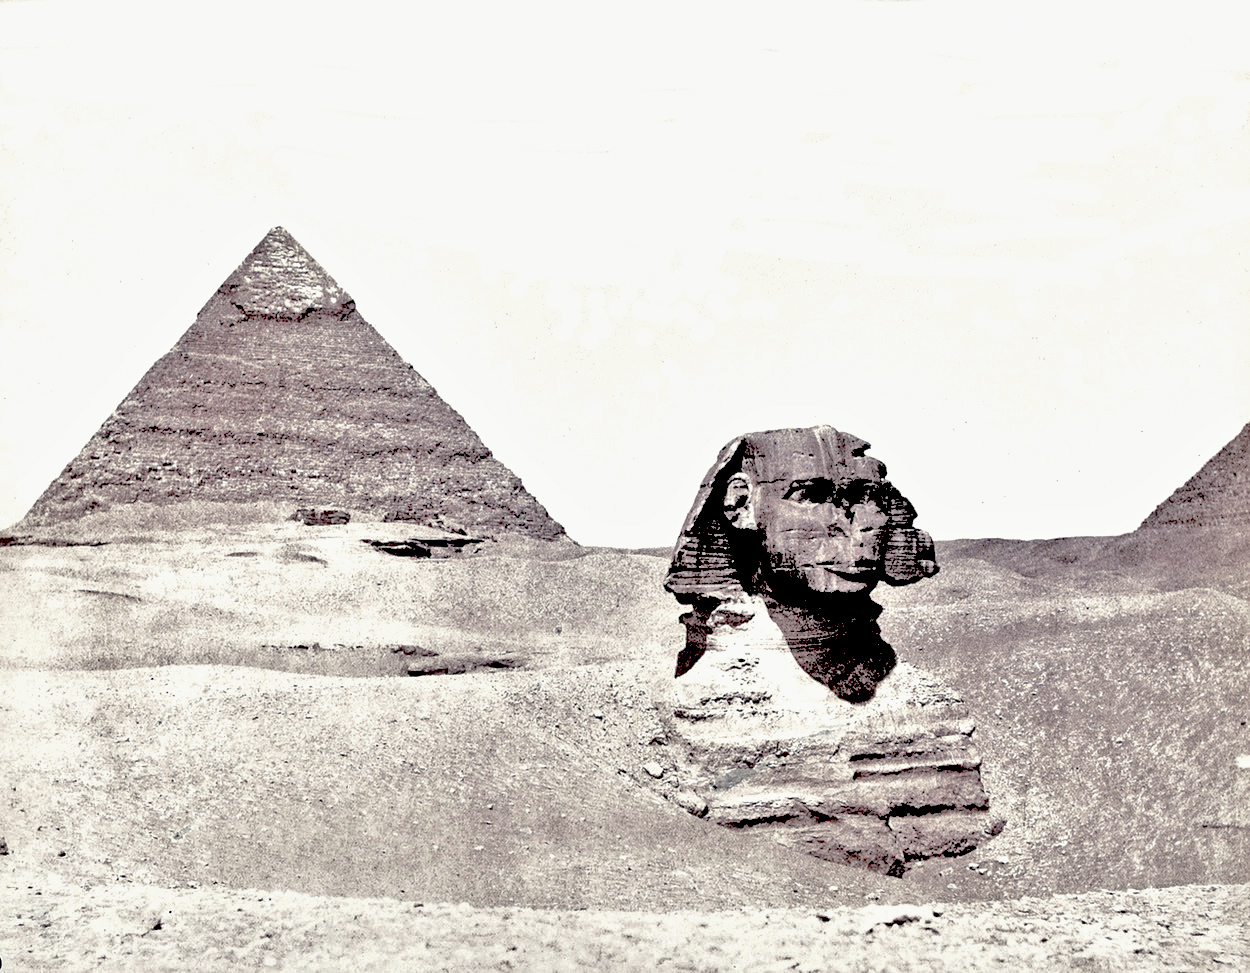 Gizeh: Sphinx and Pyramids